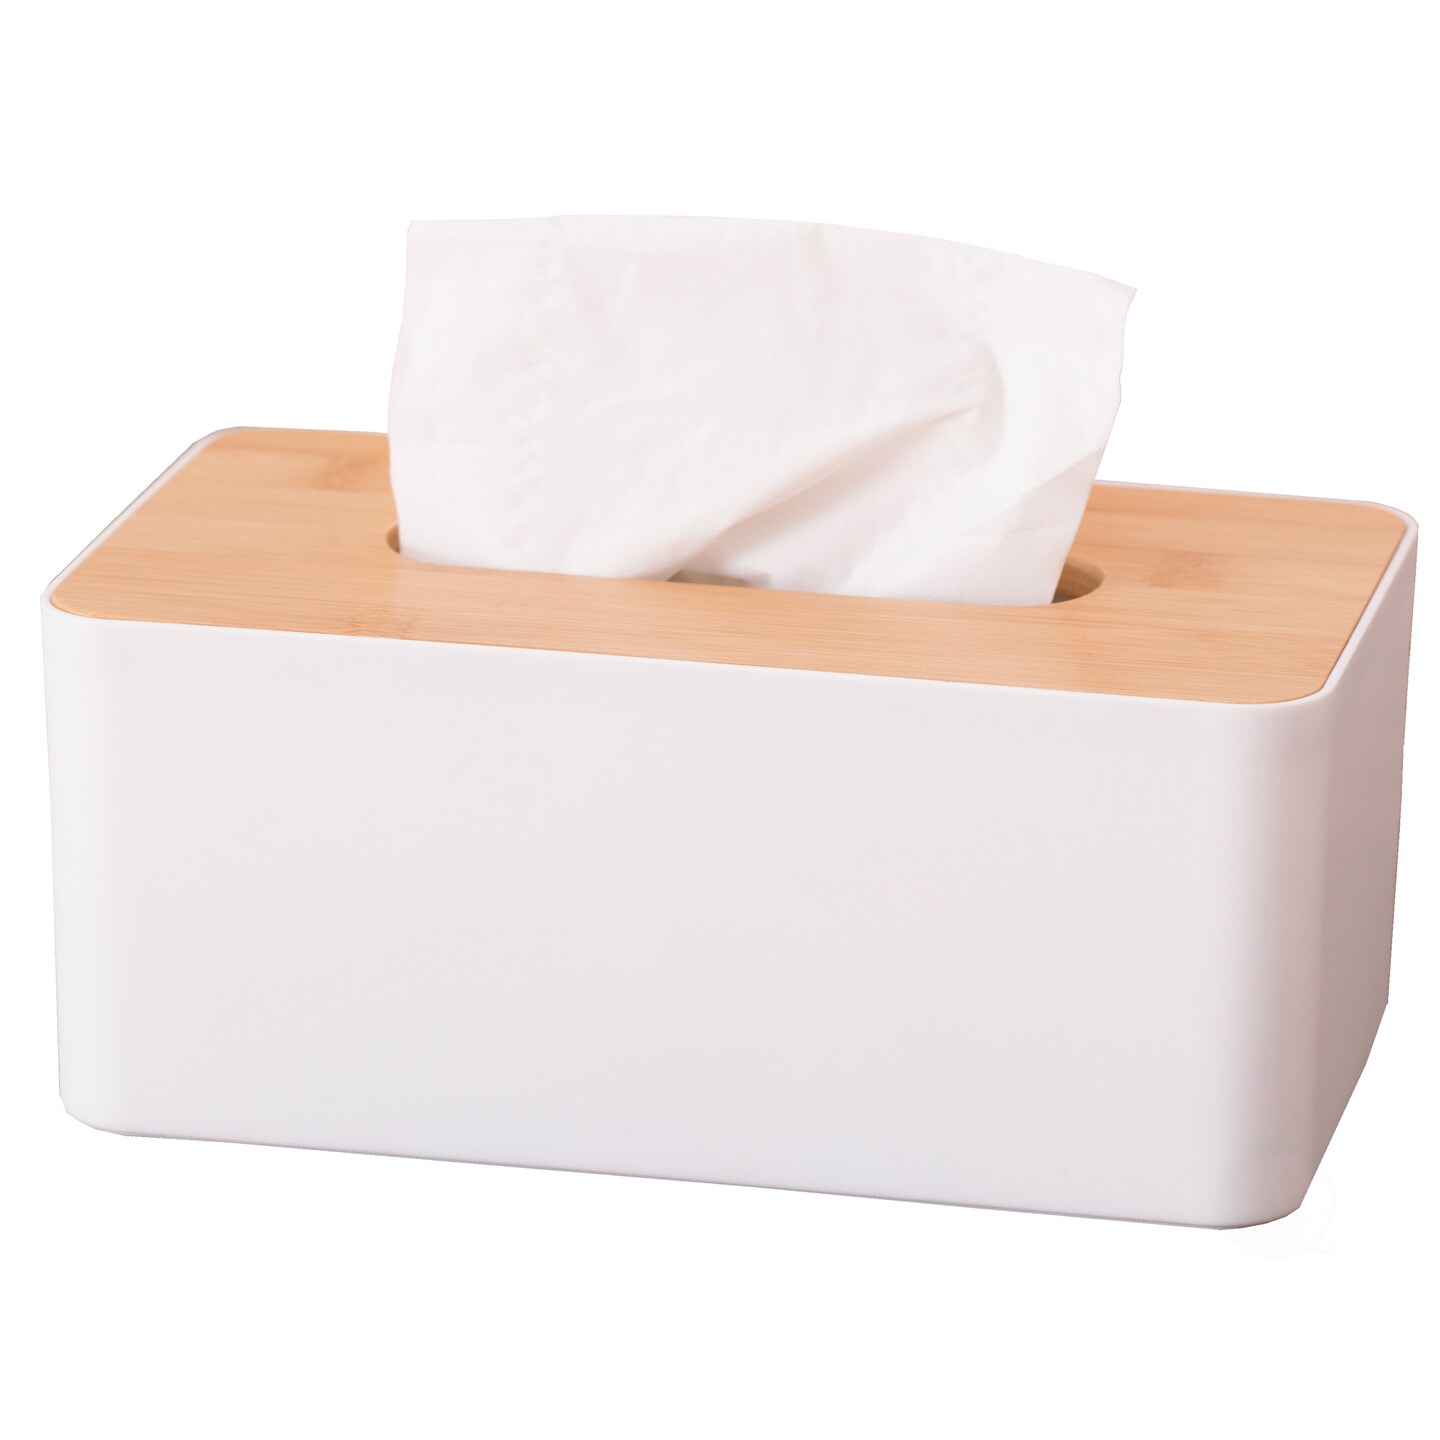 Basicwise Bamboo Removable Top Lid Rectangular Tissue box